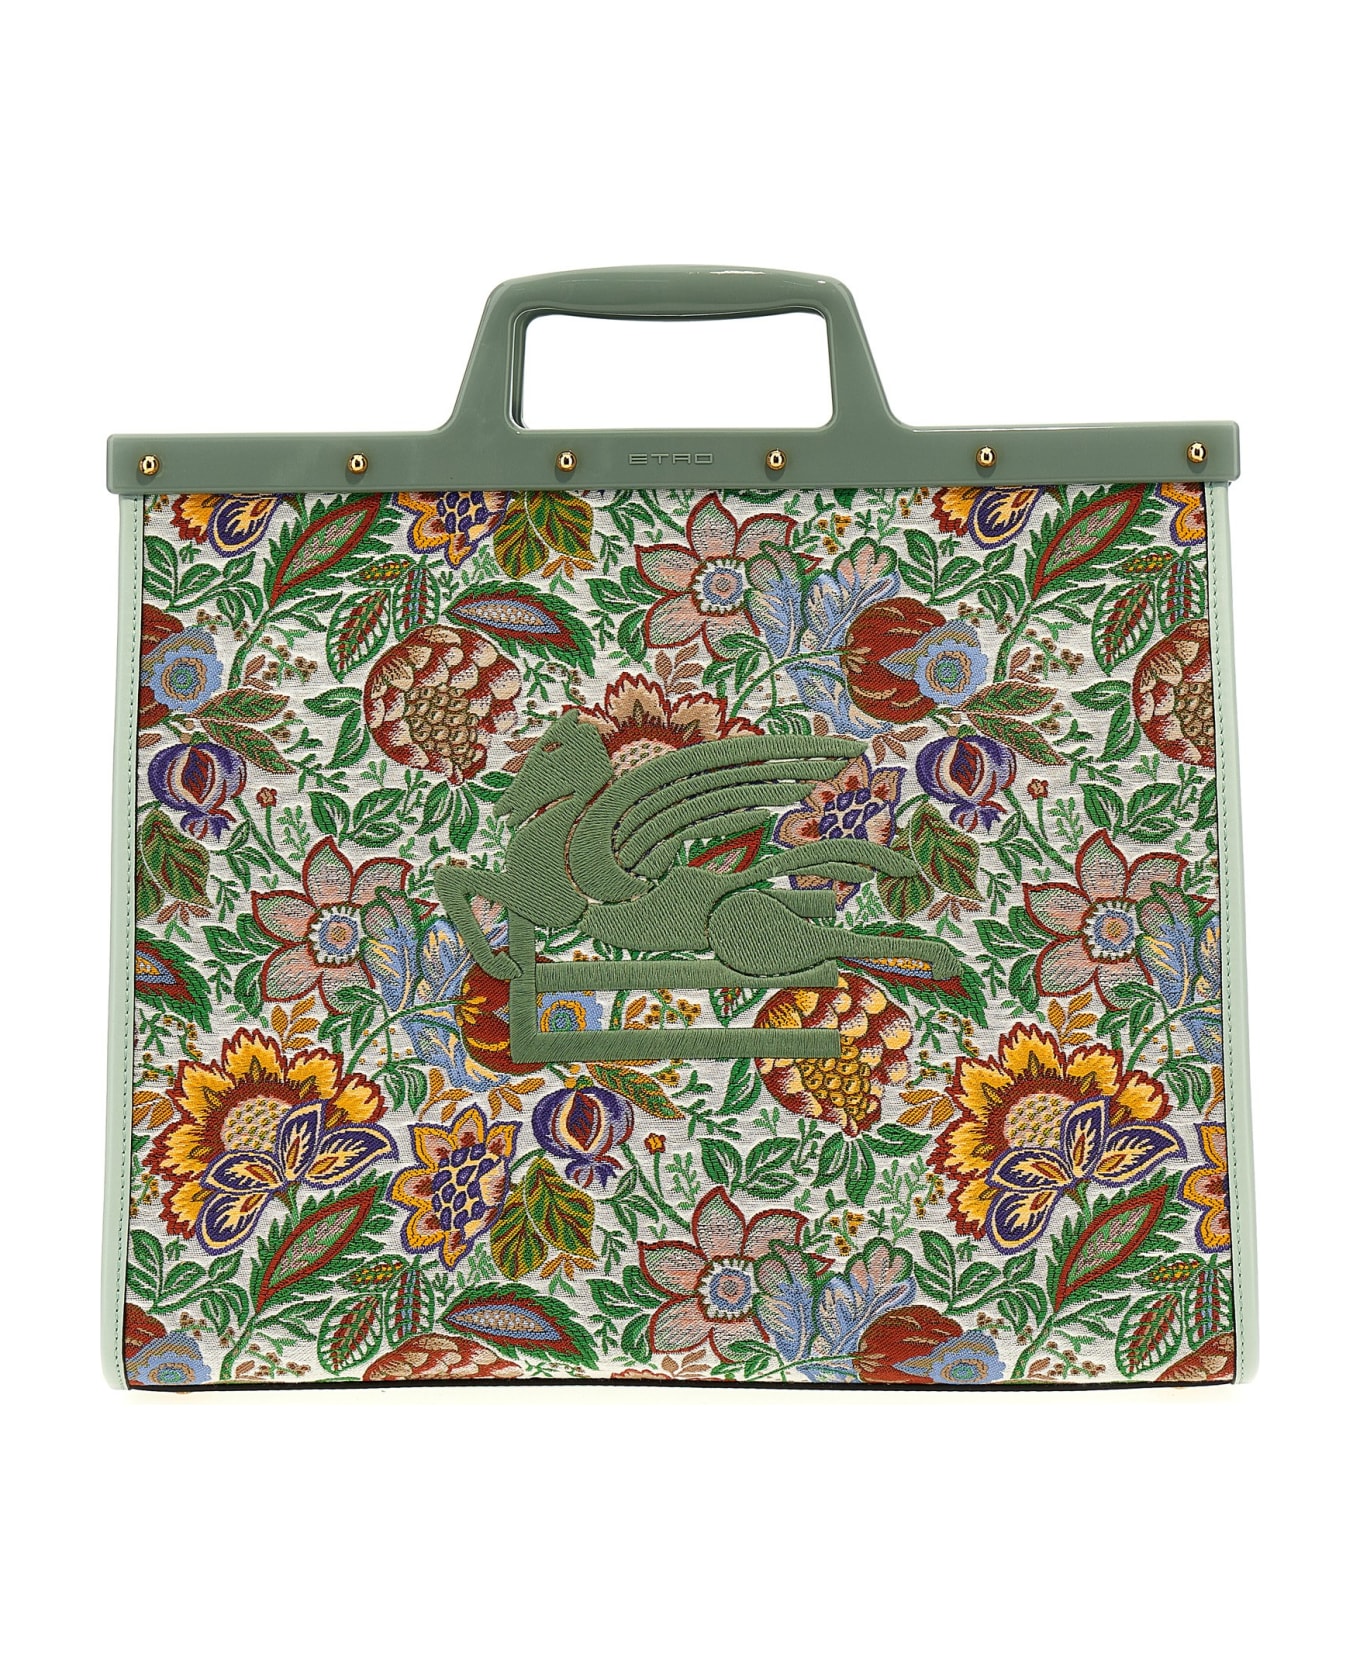 Etro Floral Jacquard Large Love Trotter Shopping Bag - Green トートバッグ